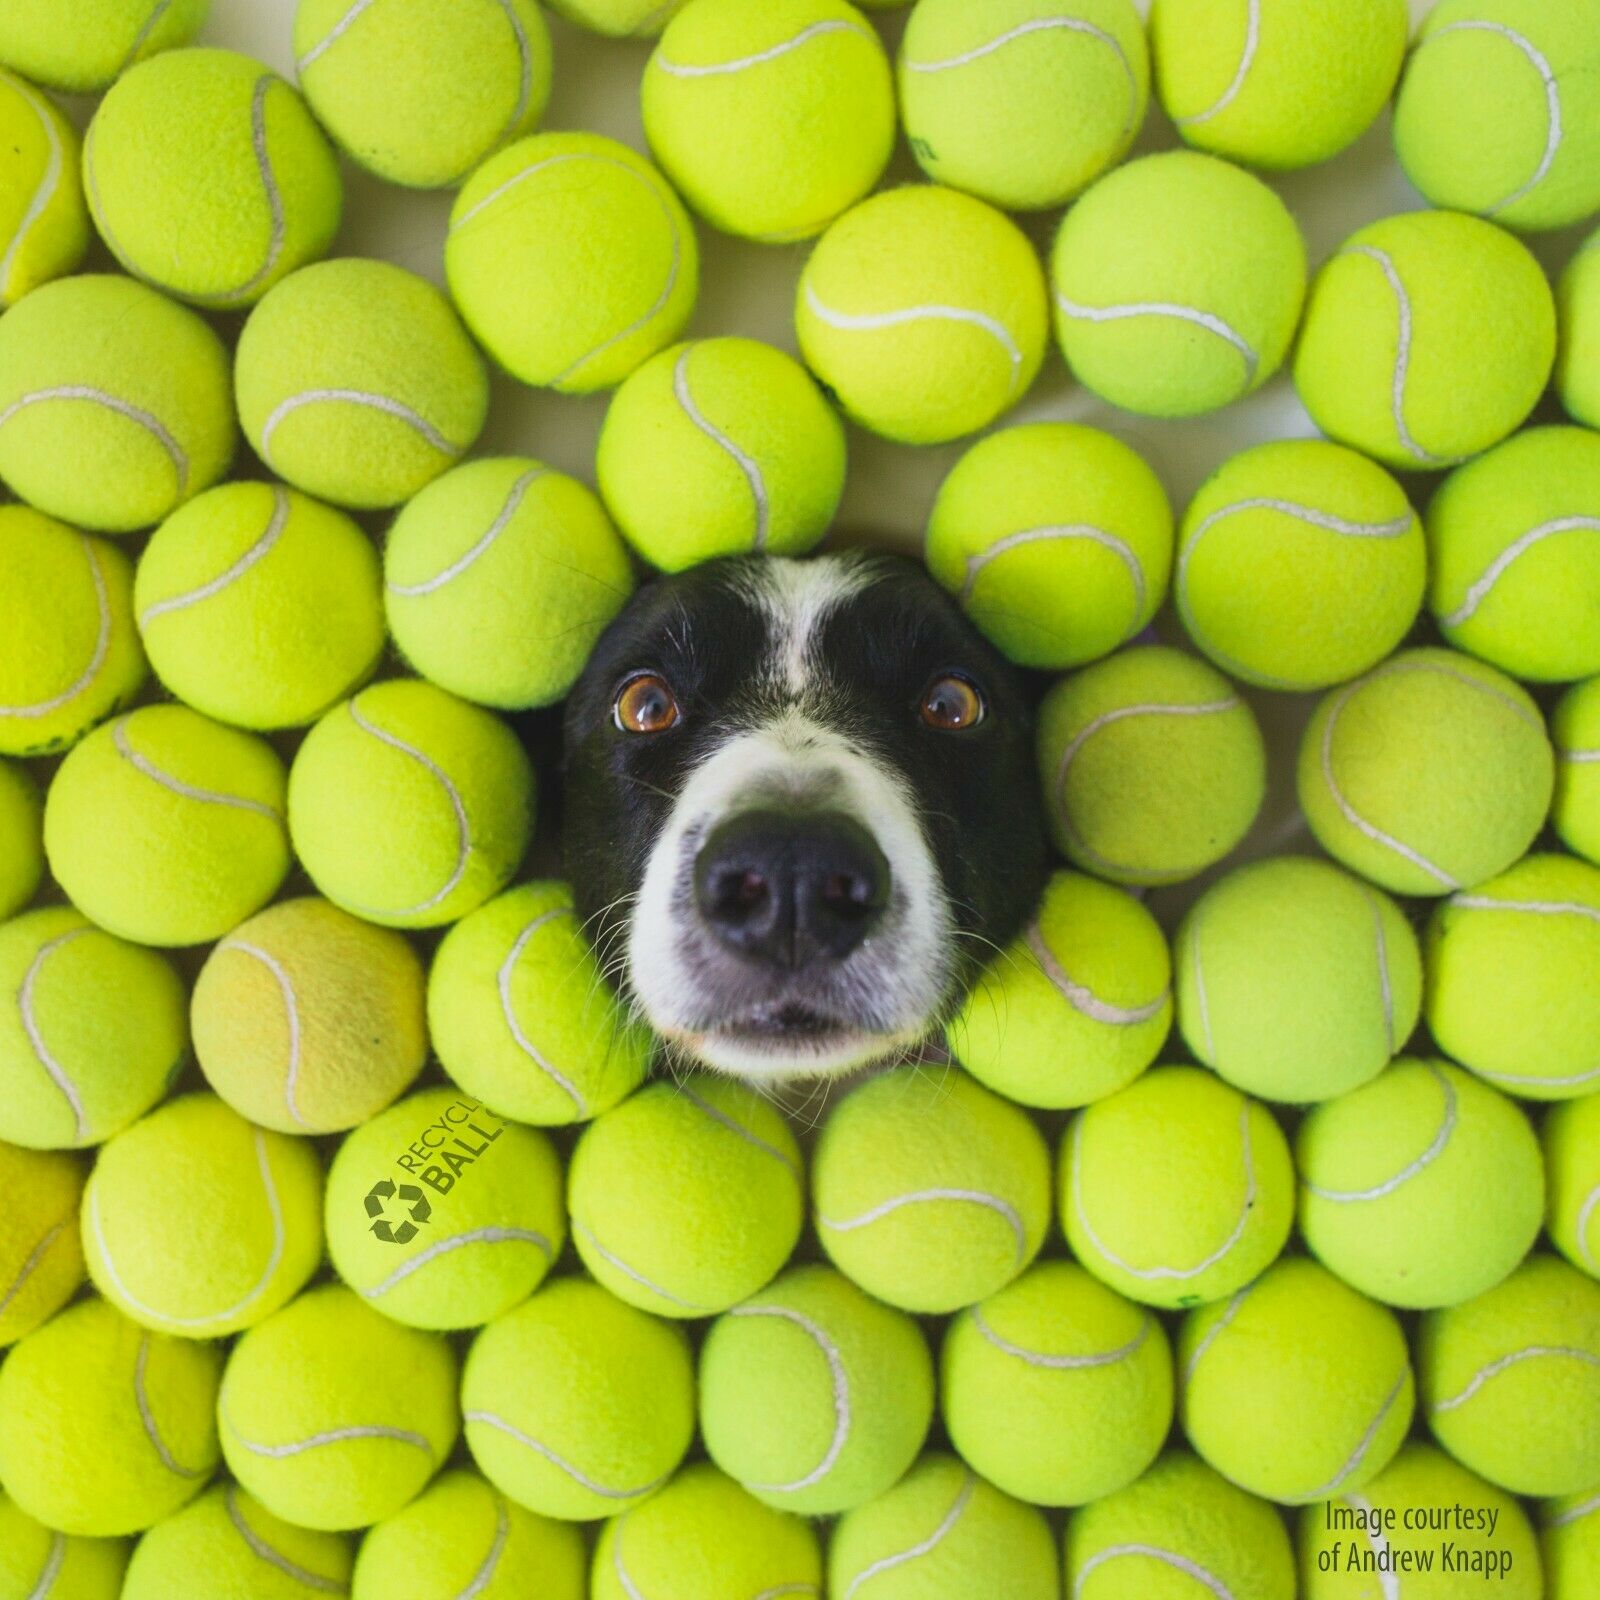 200 Used Tennis Balls  Low Cost Doggie Balls With Bounce  Free Ship - Save 10%